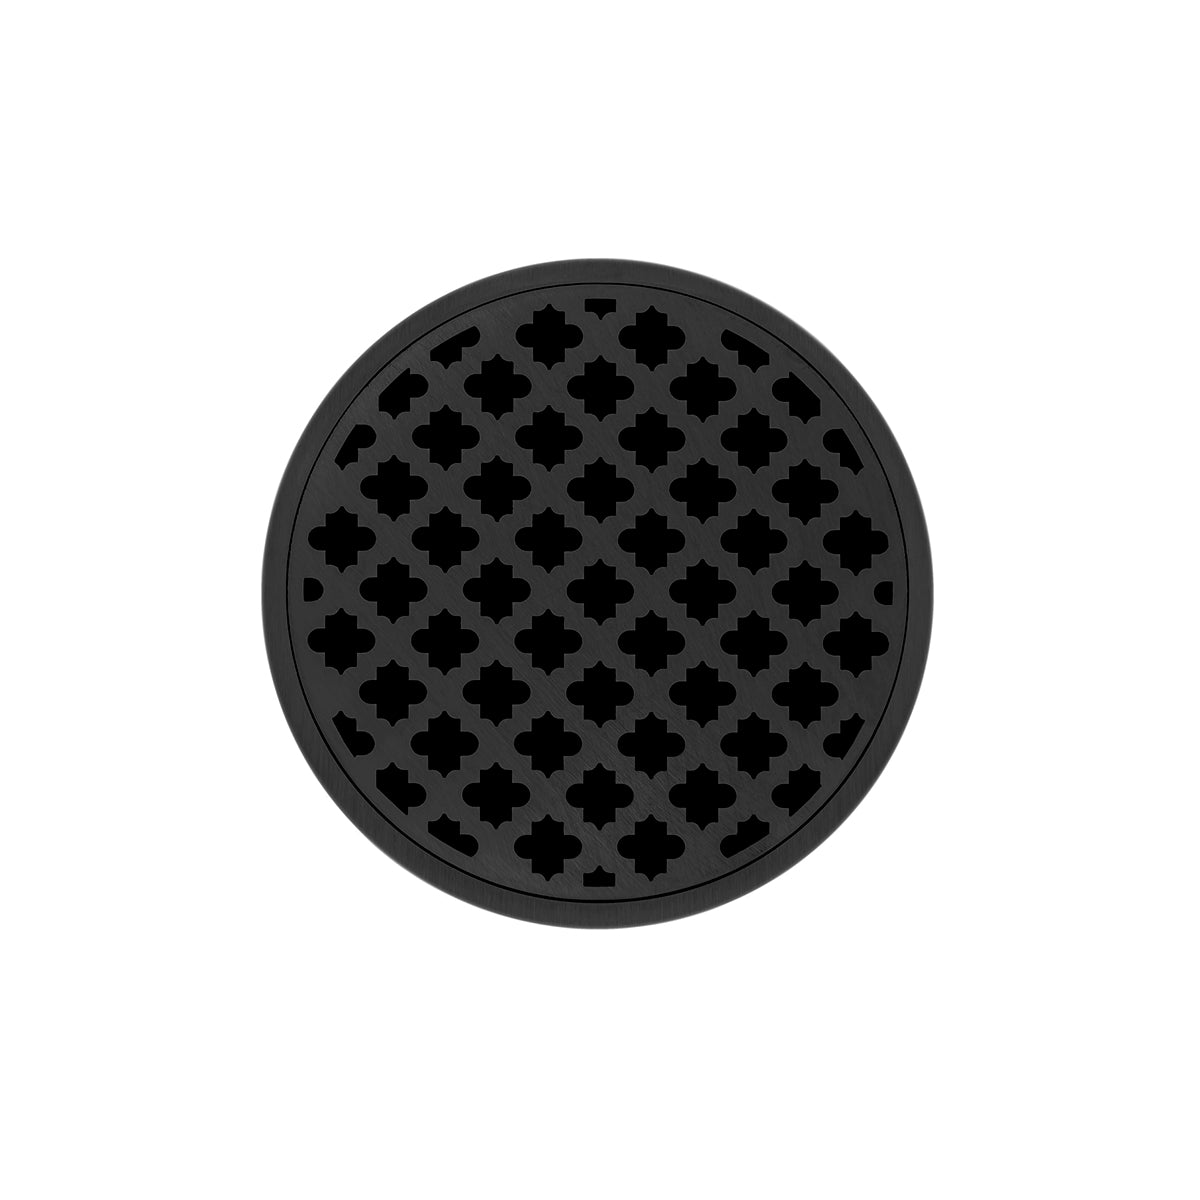 Infinity Drain 5" Round RMD 5 Premium Center Drain Kit with Moor Pattern Decorative Plate with PVC Drain Body, 2" Outlet